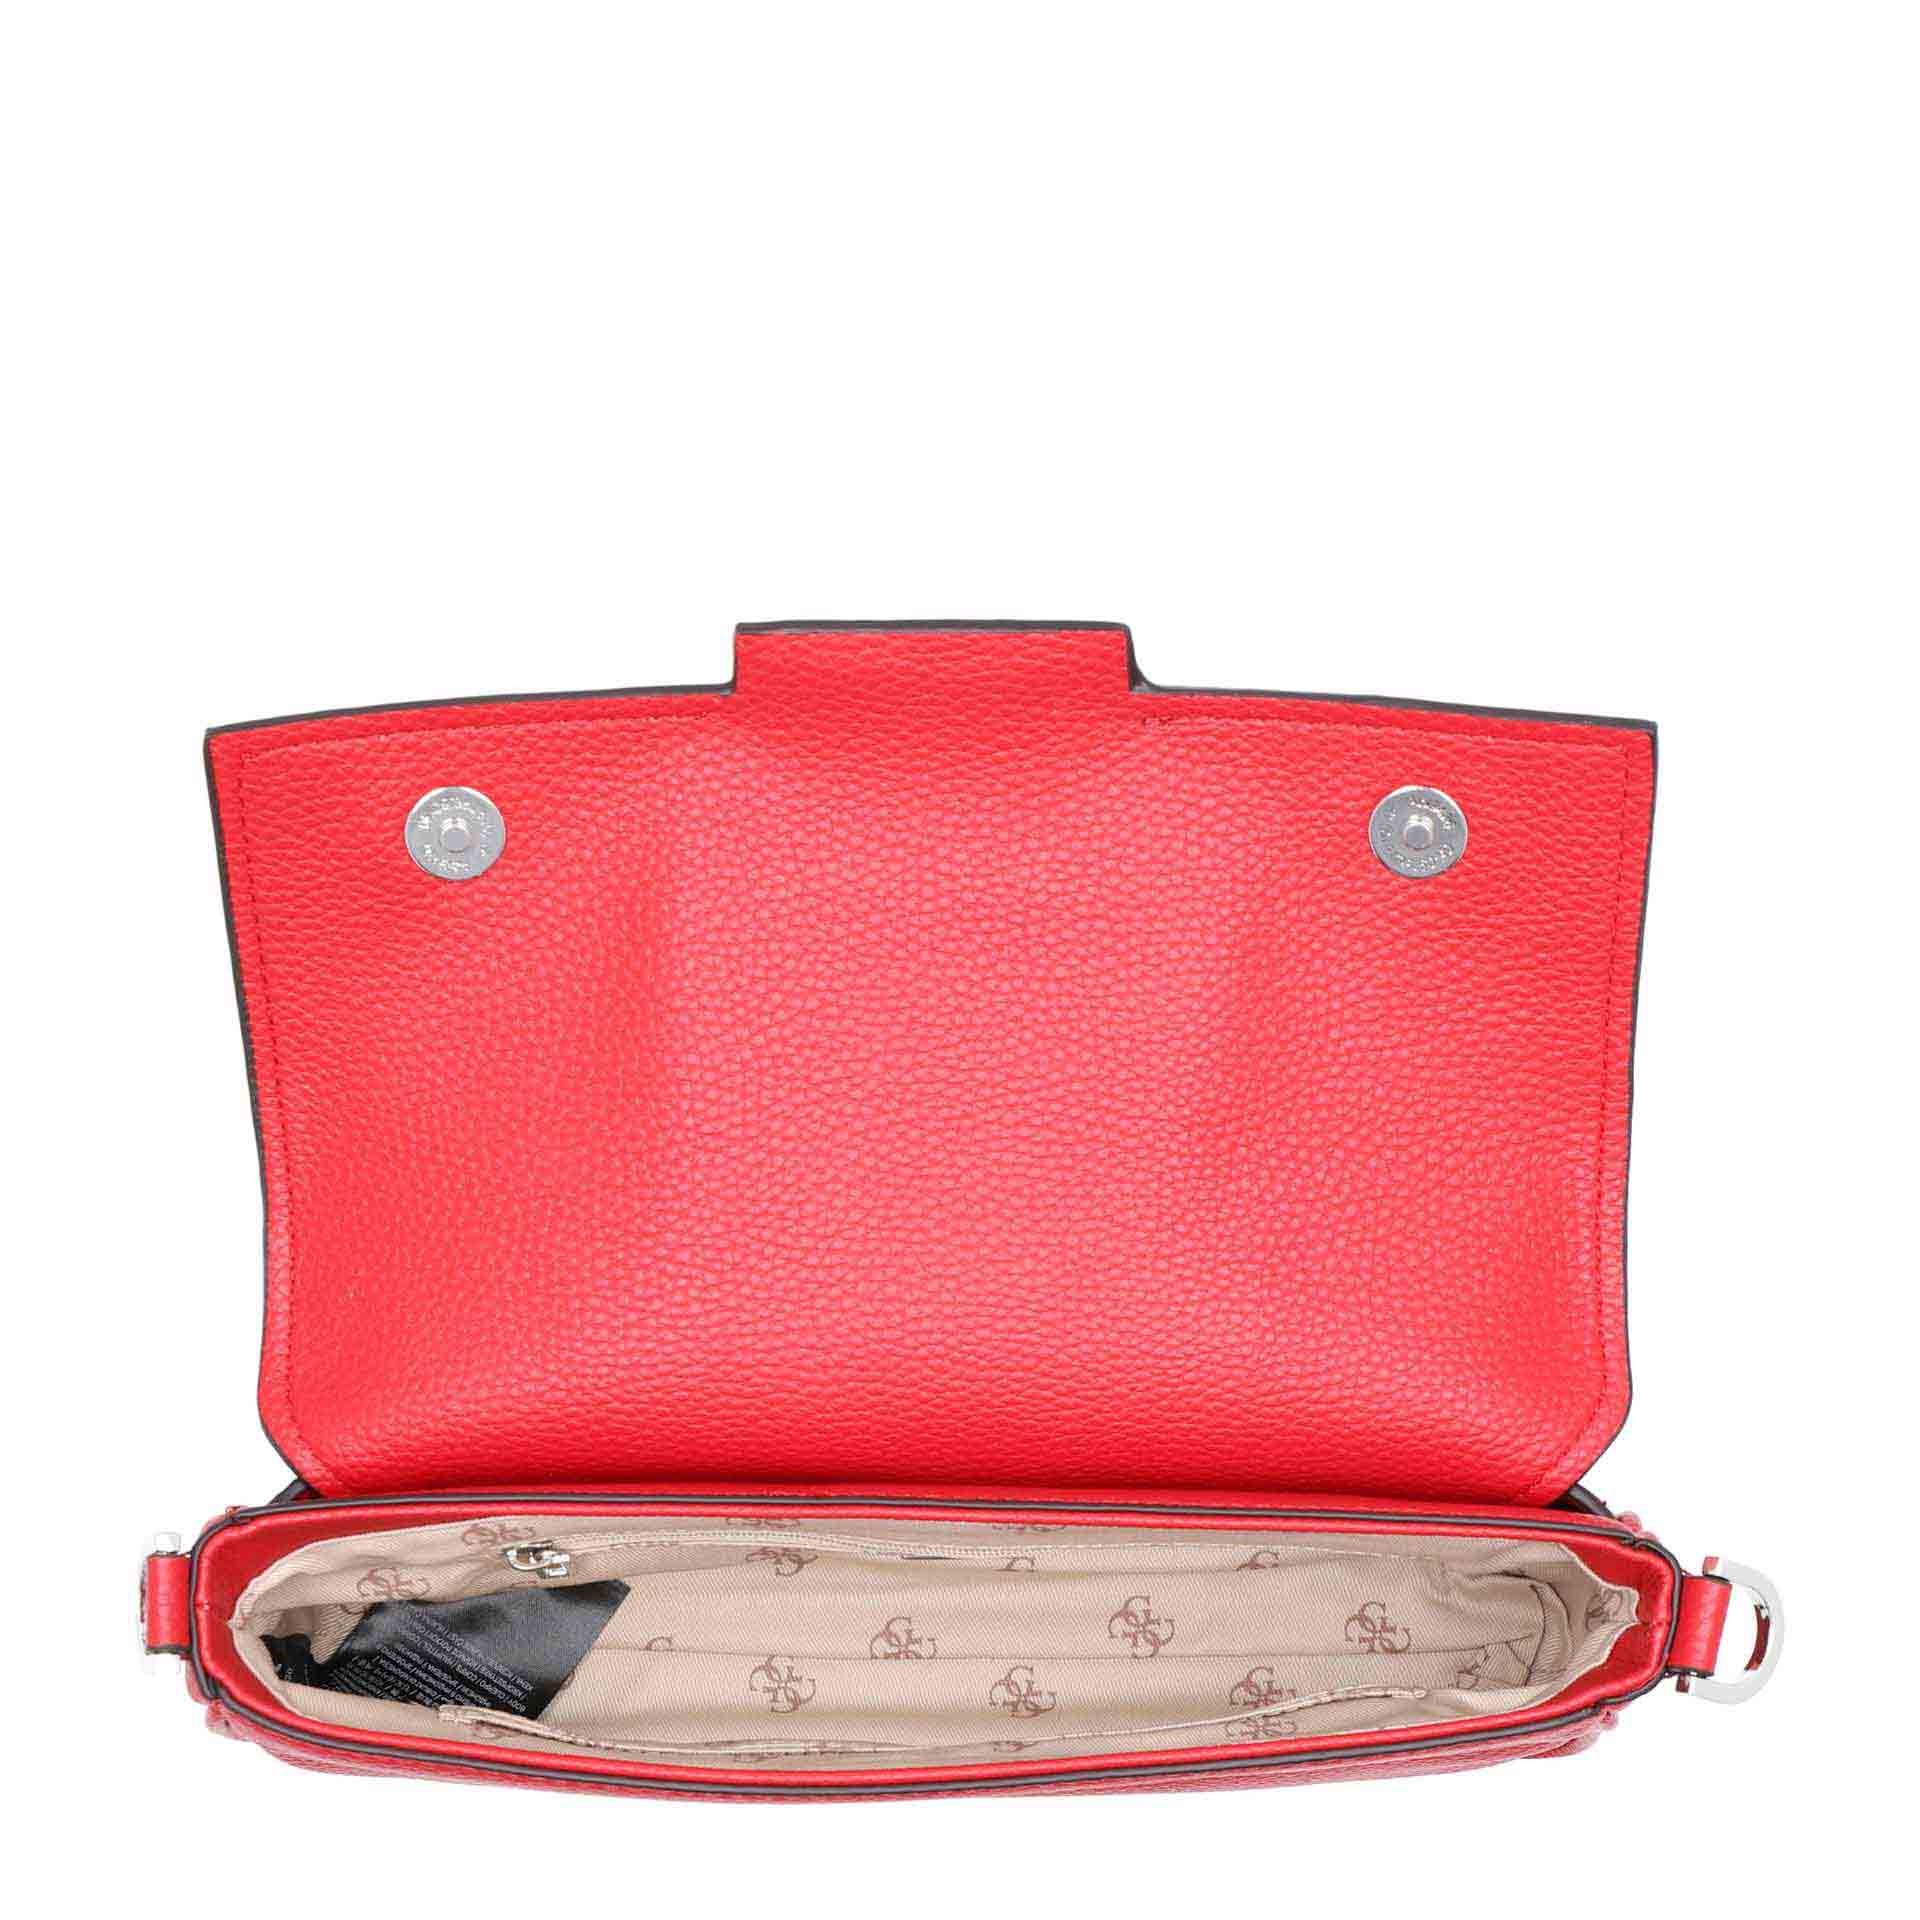 Guess Brightside Schultertasche red